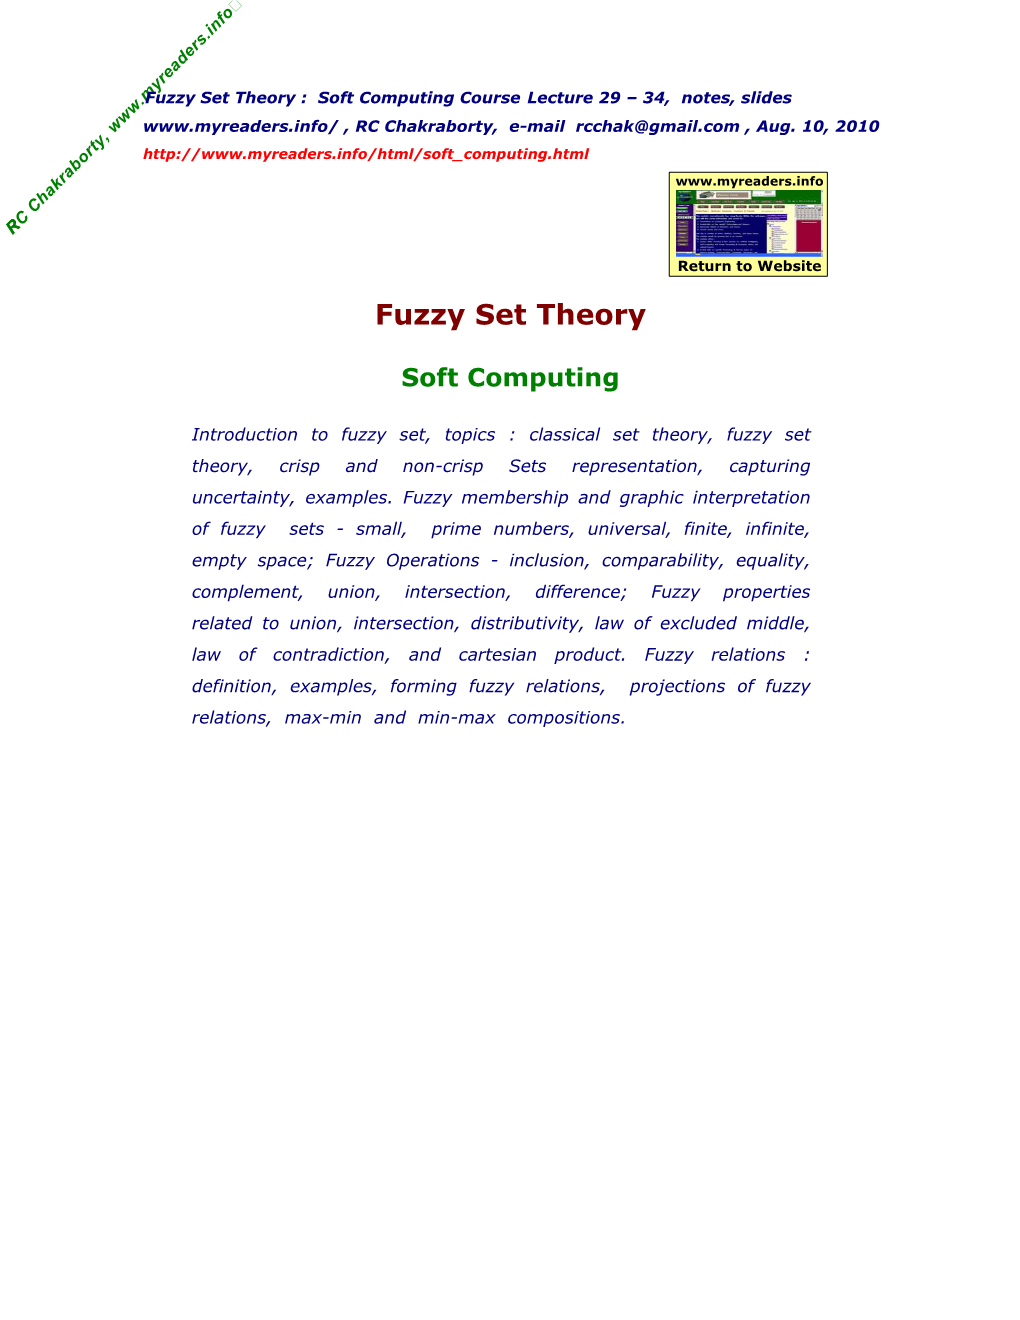 Fuzzy Set Theory : Soft Computing Course Lecture 29 – 34, Notes, Slides , RC Chakraborty, E-Mail Rcchak@Gmail.Com , Aug